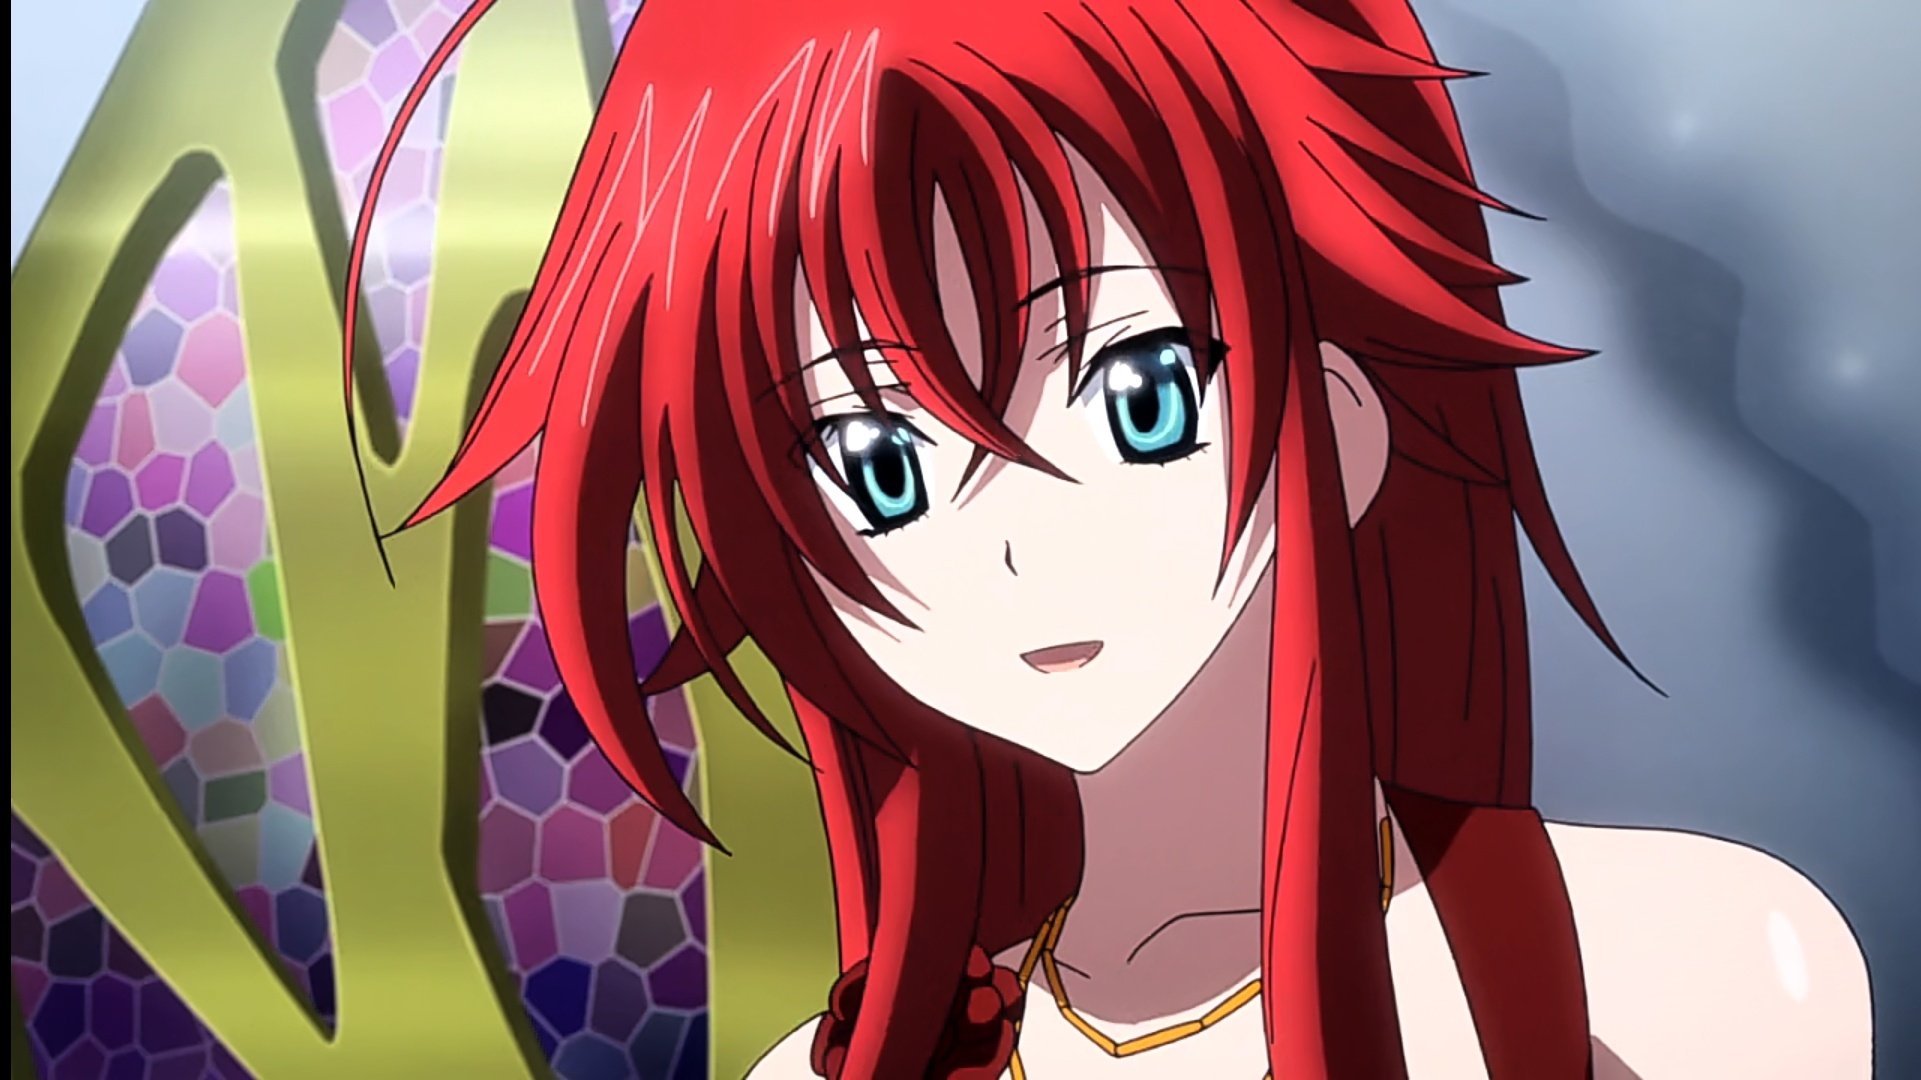 Issei The Red Dragon Emperor on X: MFs give us S5 of High School DxD  #HighSchoolDxD #RiasGremory #Issei #Anime  / X